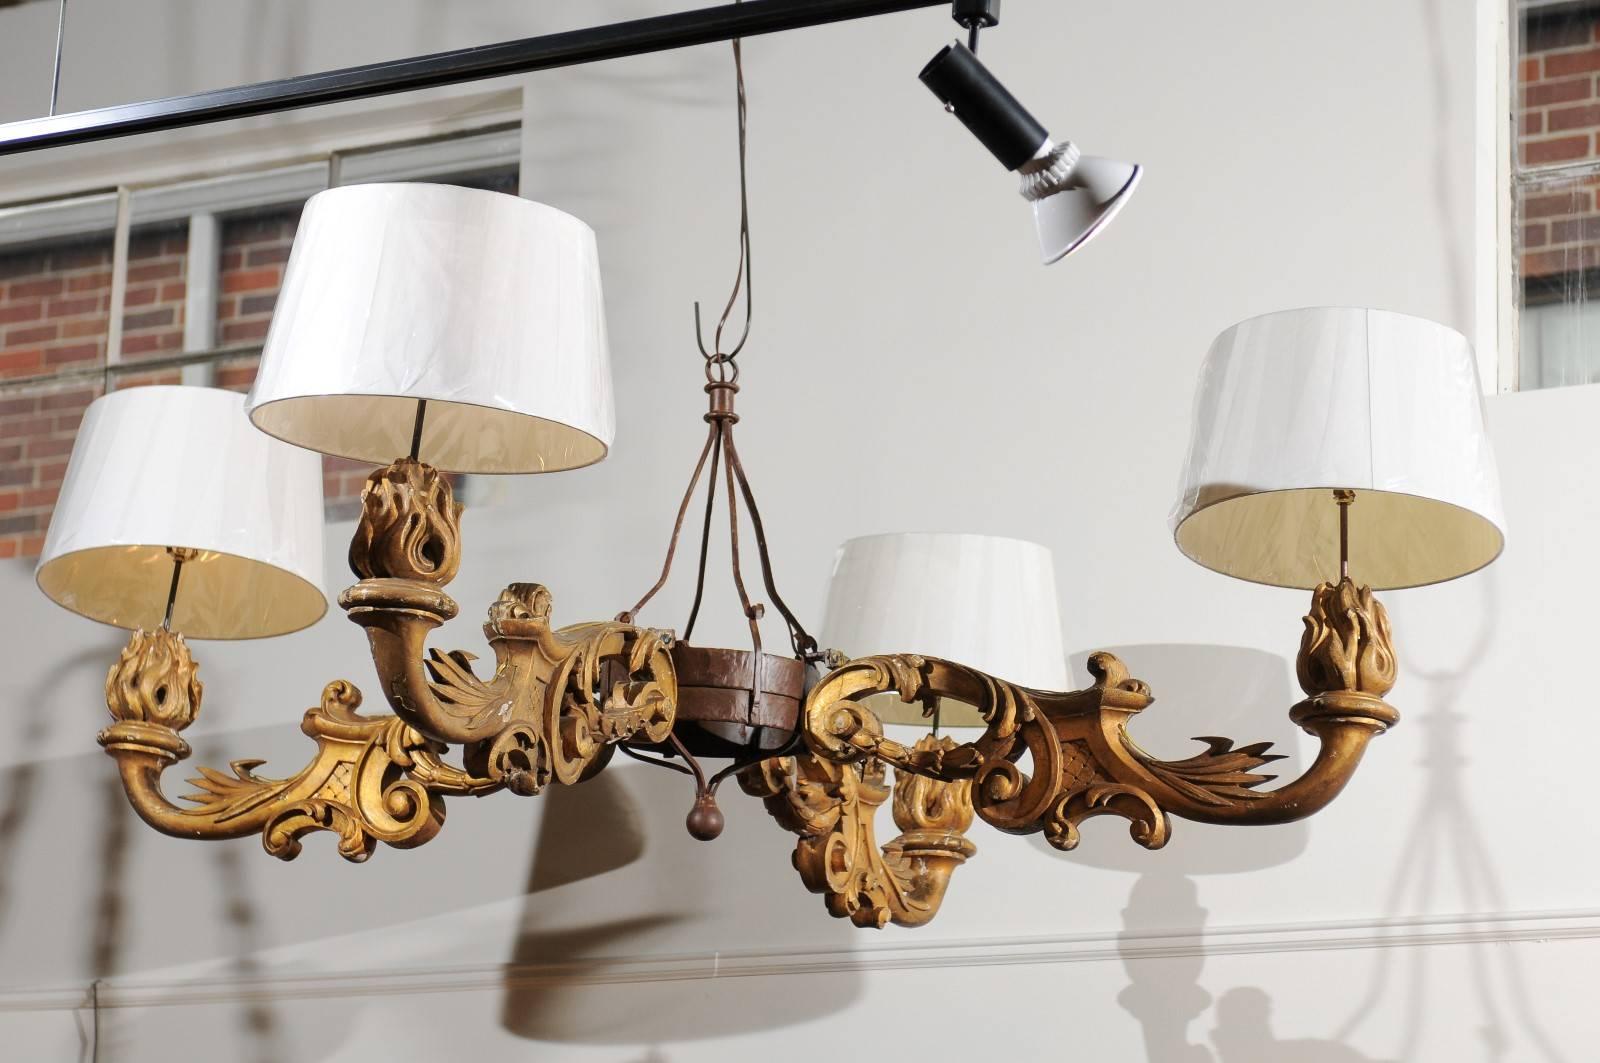 Chandelier made from giltwood architectural elements. Shades not included.